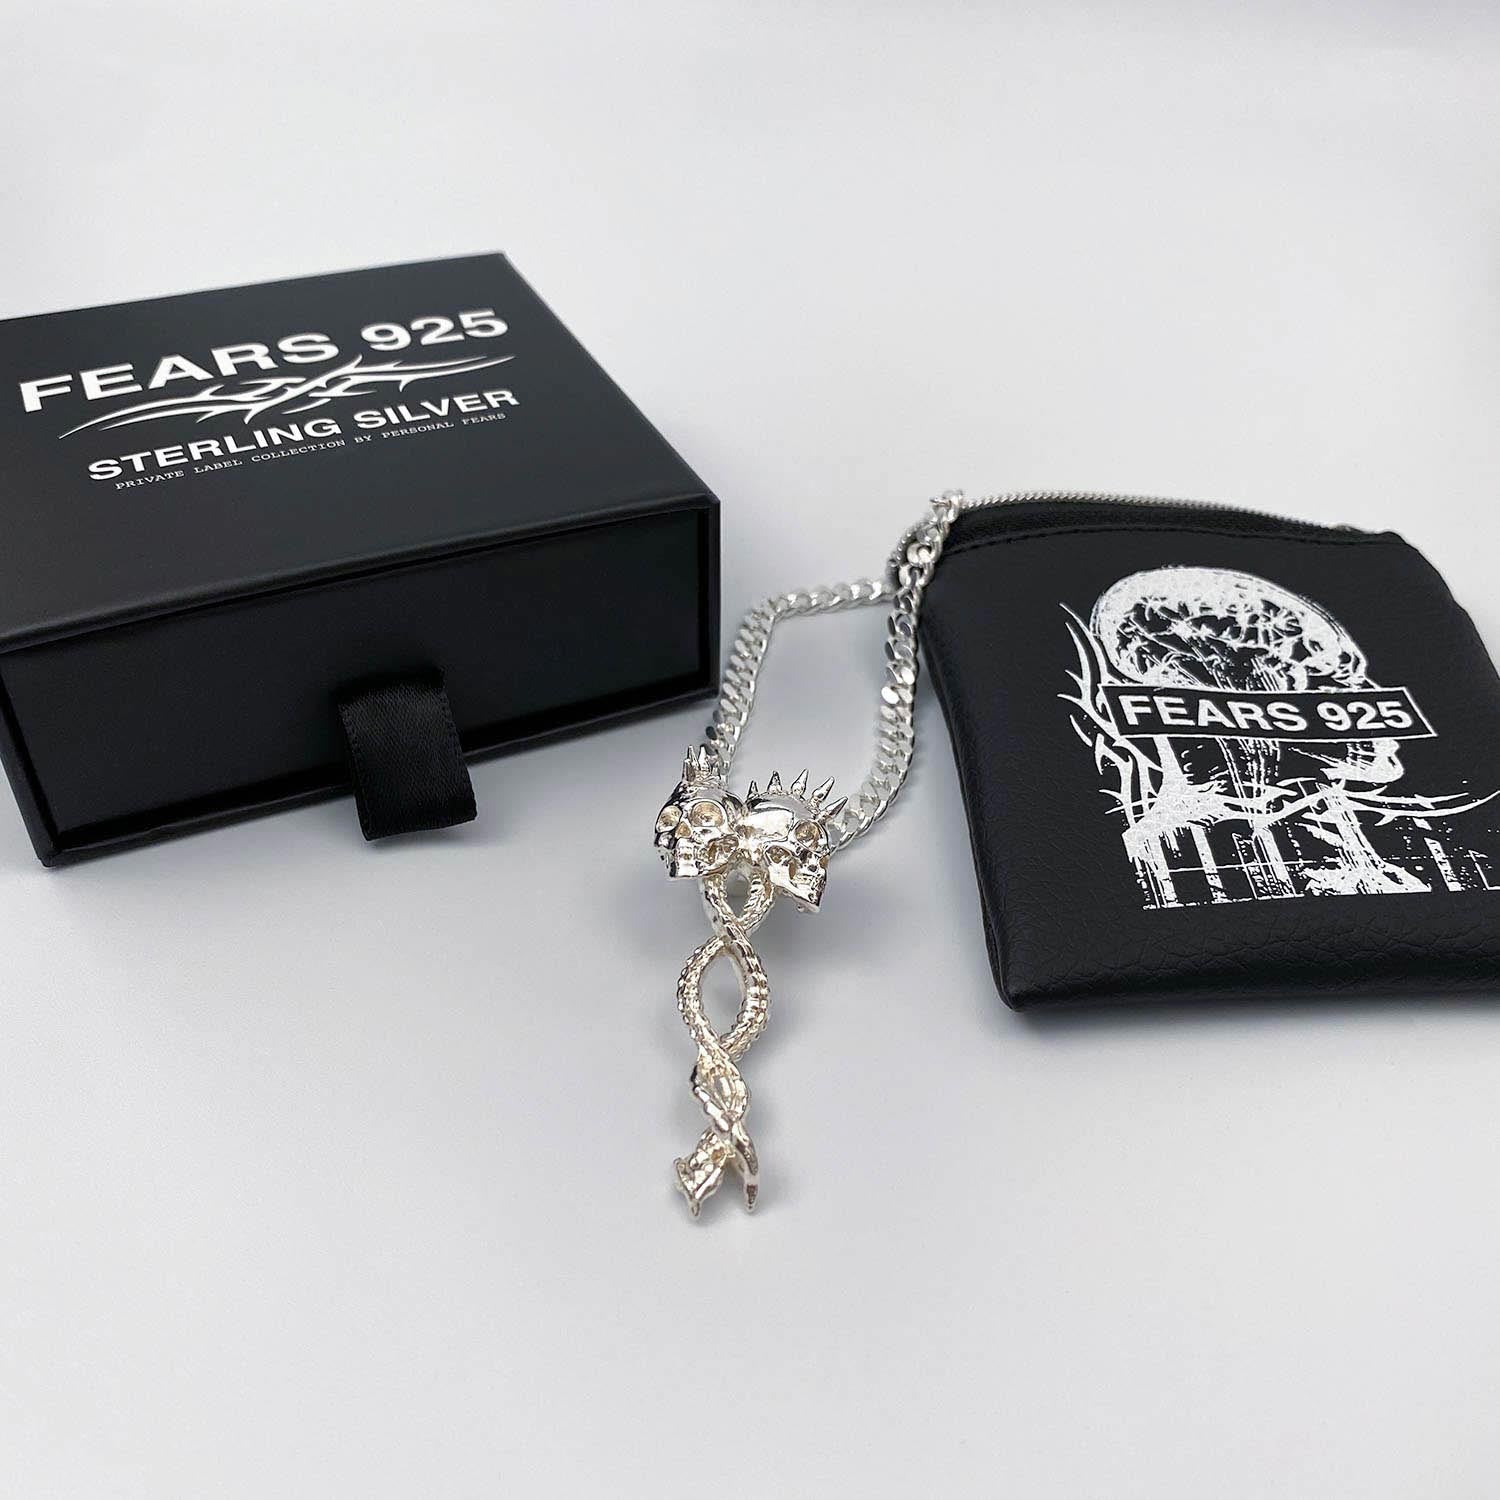 Personal Fears Dual Spines Chain in Sterling Silver on Bag 